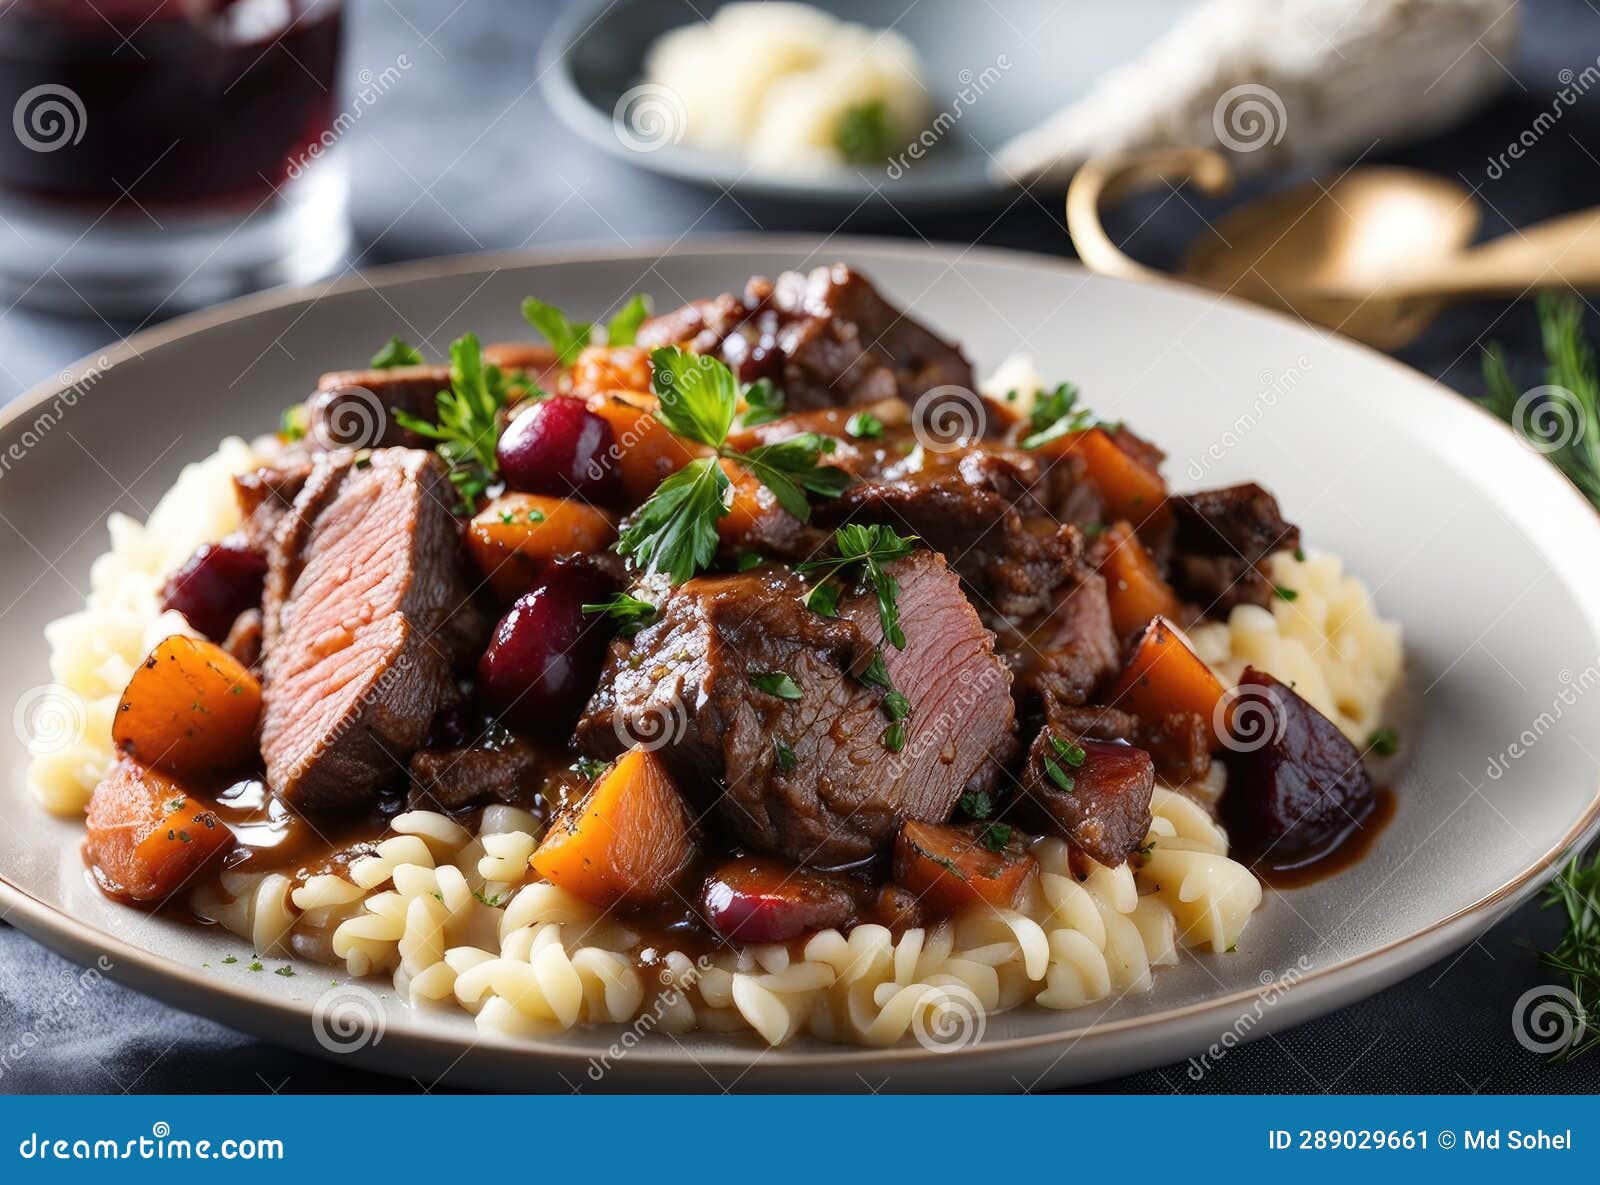 a toothsome plate beef bourguignon, but instead beef use diced plums